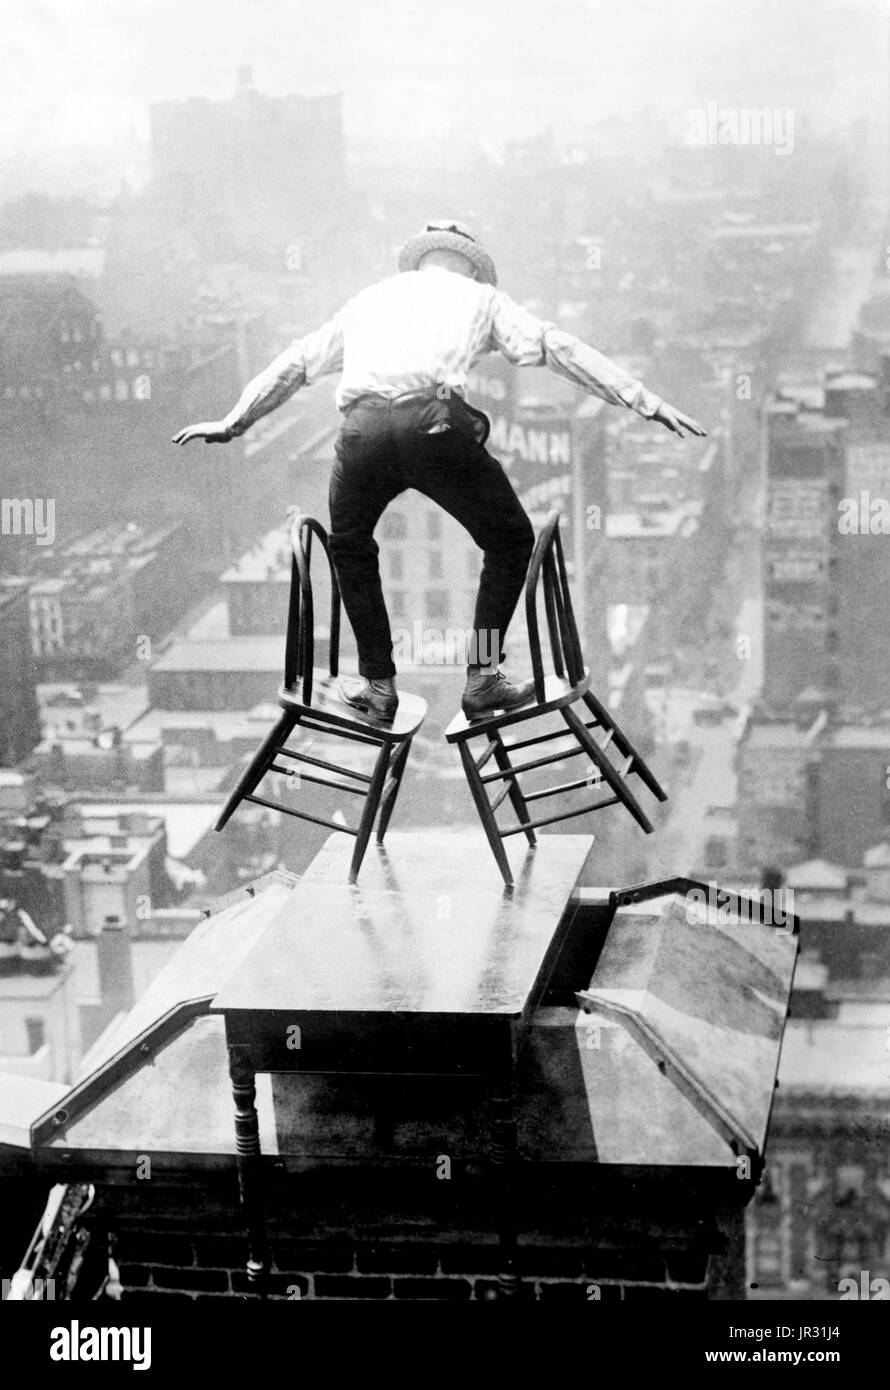 'Human Fly' Reynolds on a roof in New York City. John 'Jammie' Reynolds (born 1890 or 91 - ?) was an American daredevil. Little is known about early life, what became of him once he stopped performing or even his real name. An acrobat and juggler, he was known by many names - Daredevil Johnny, Daredevil Jack, the Climbing Wonder, The Lizard, the Human Spider, and the Human Fly. A newspaper article from 1922 claims he began performing at the age six in Buffalo, balancing on one foot from a flagpole 140 feet in the air. His first major stunt came at age 12 when he climbed up the side of the Old  Stock Photo